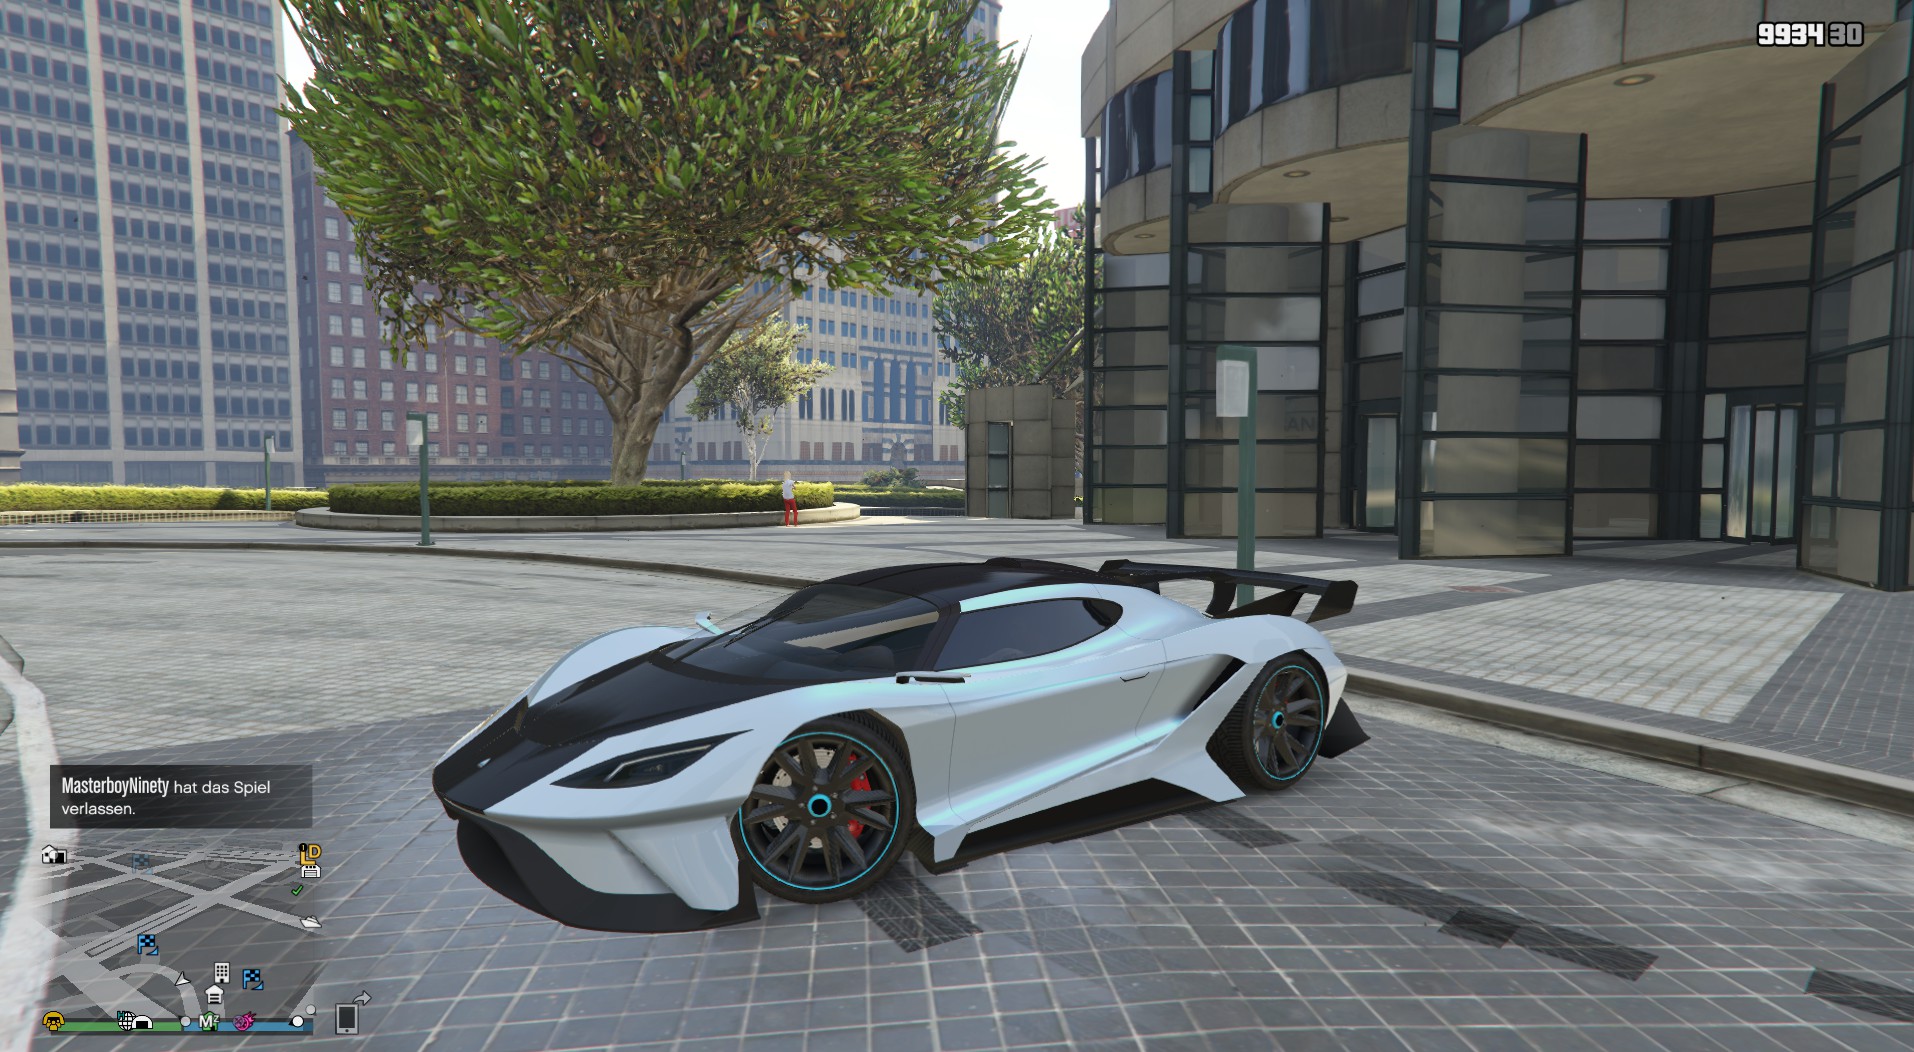 Top 5 best pearlescent colors to use on your car in GTA Online